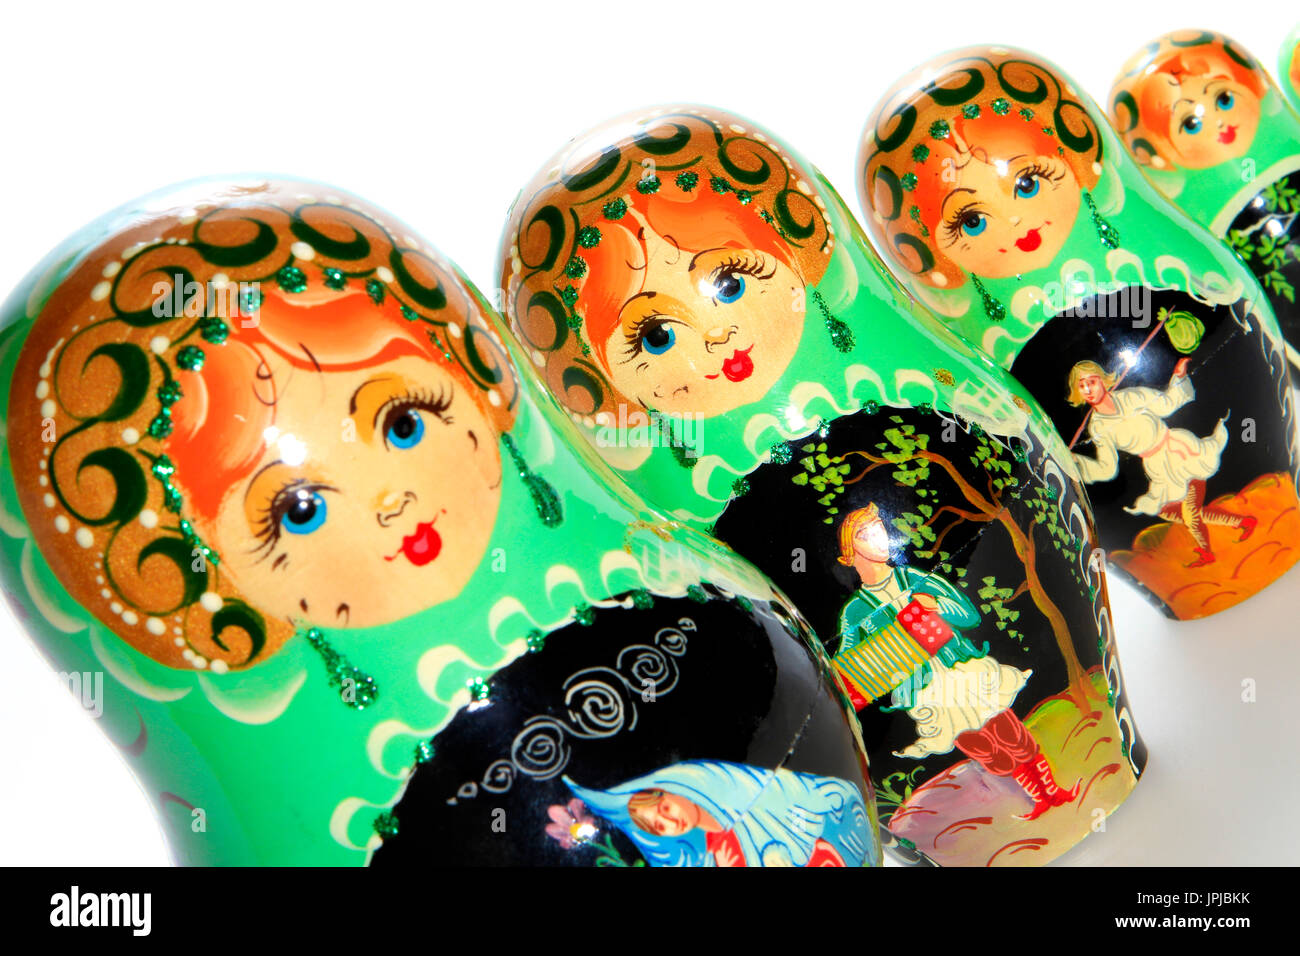 Russian matryoshka dolls, typical souvenir from Russia Stock Photo